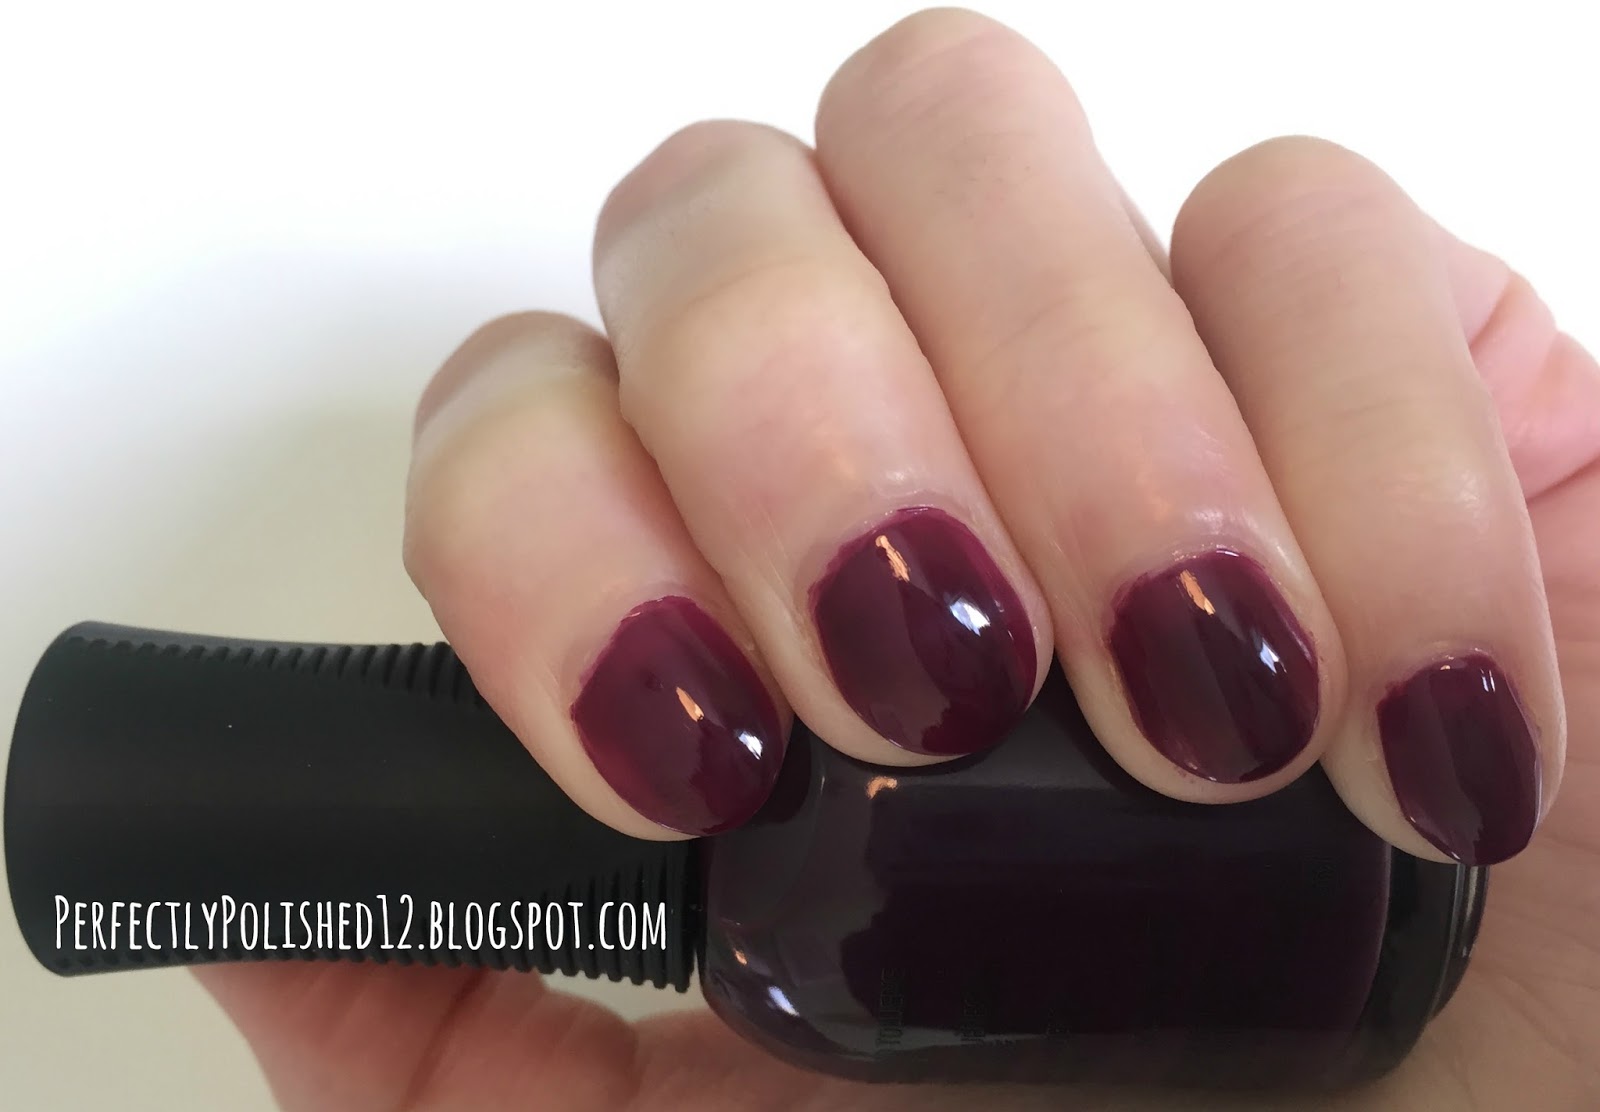 6. "Rich Plum Nail Colors to Elevate Your Fall Style" - wide 4